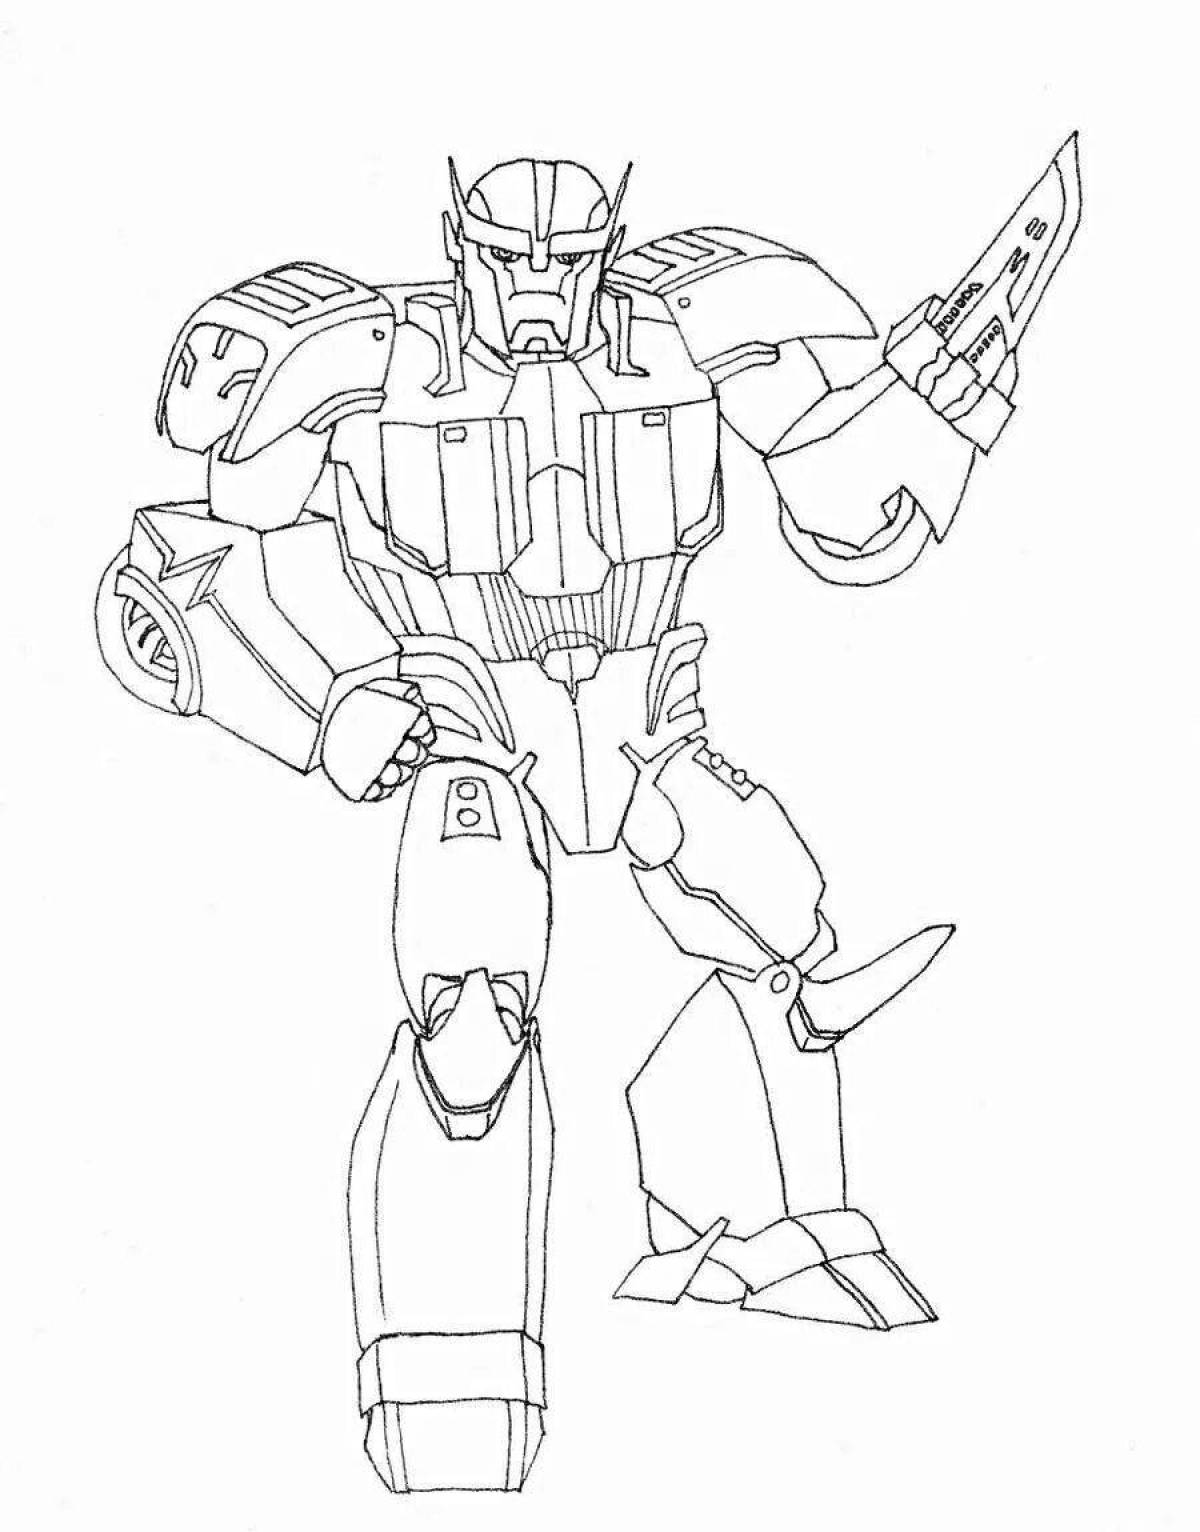 Colorfully shaded transformers prime coloring page